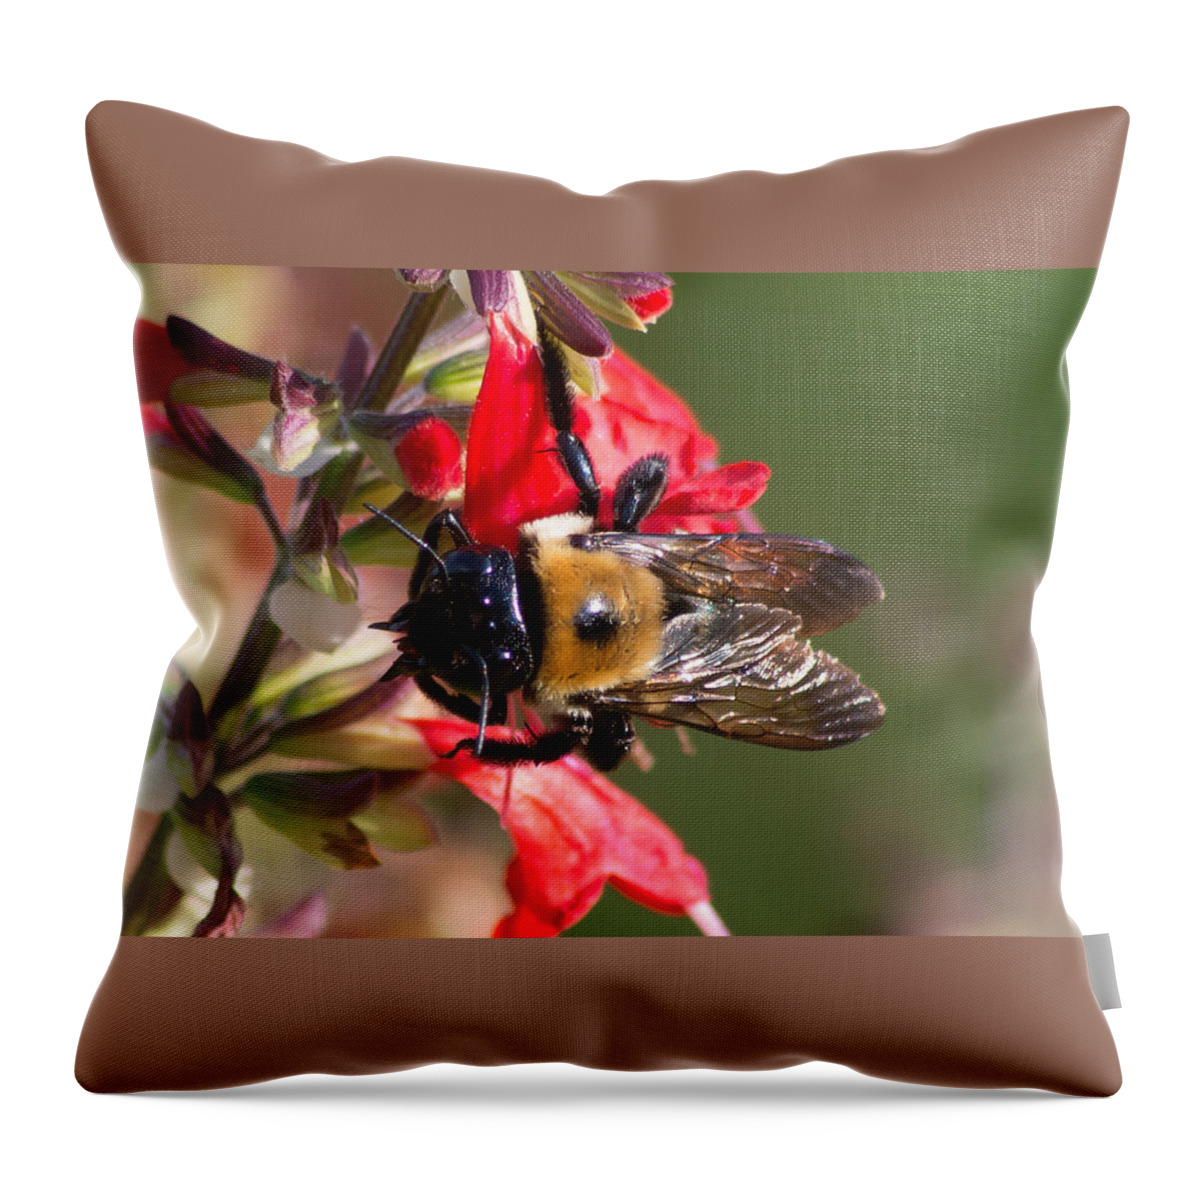 Bumble Throw Pillow featuring the photograph Bumble Bee by Willard Killough III